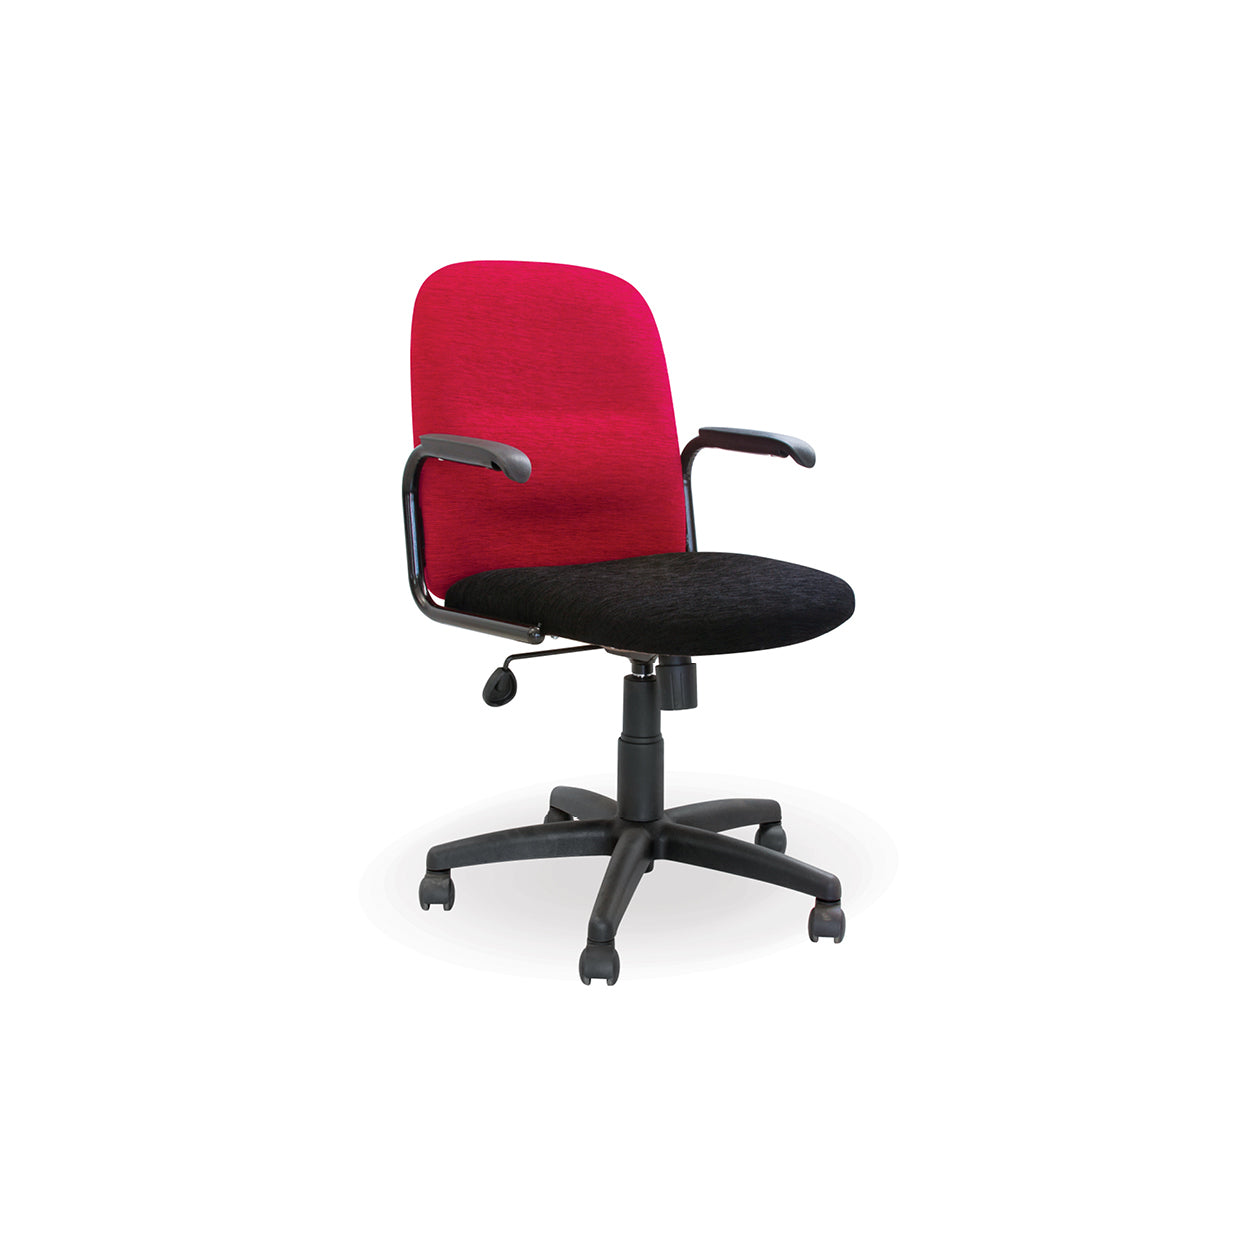 Hedcor mid back chair